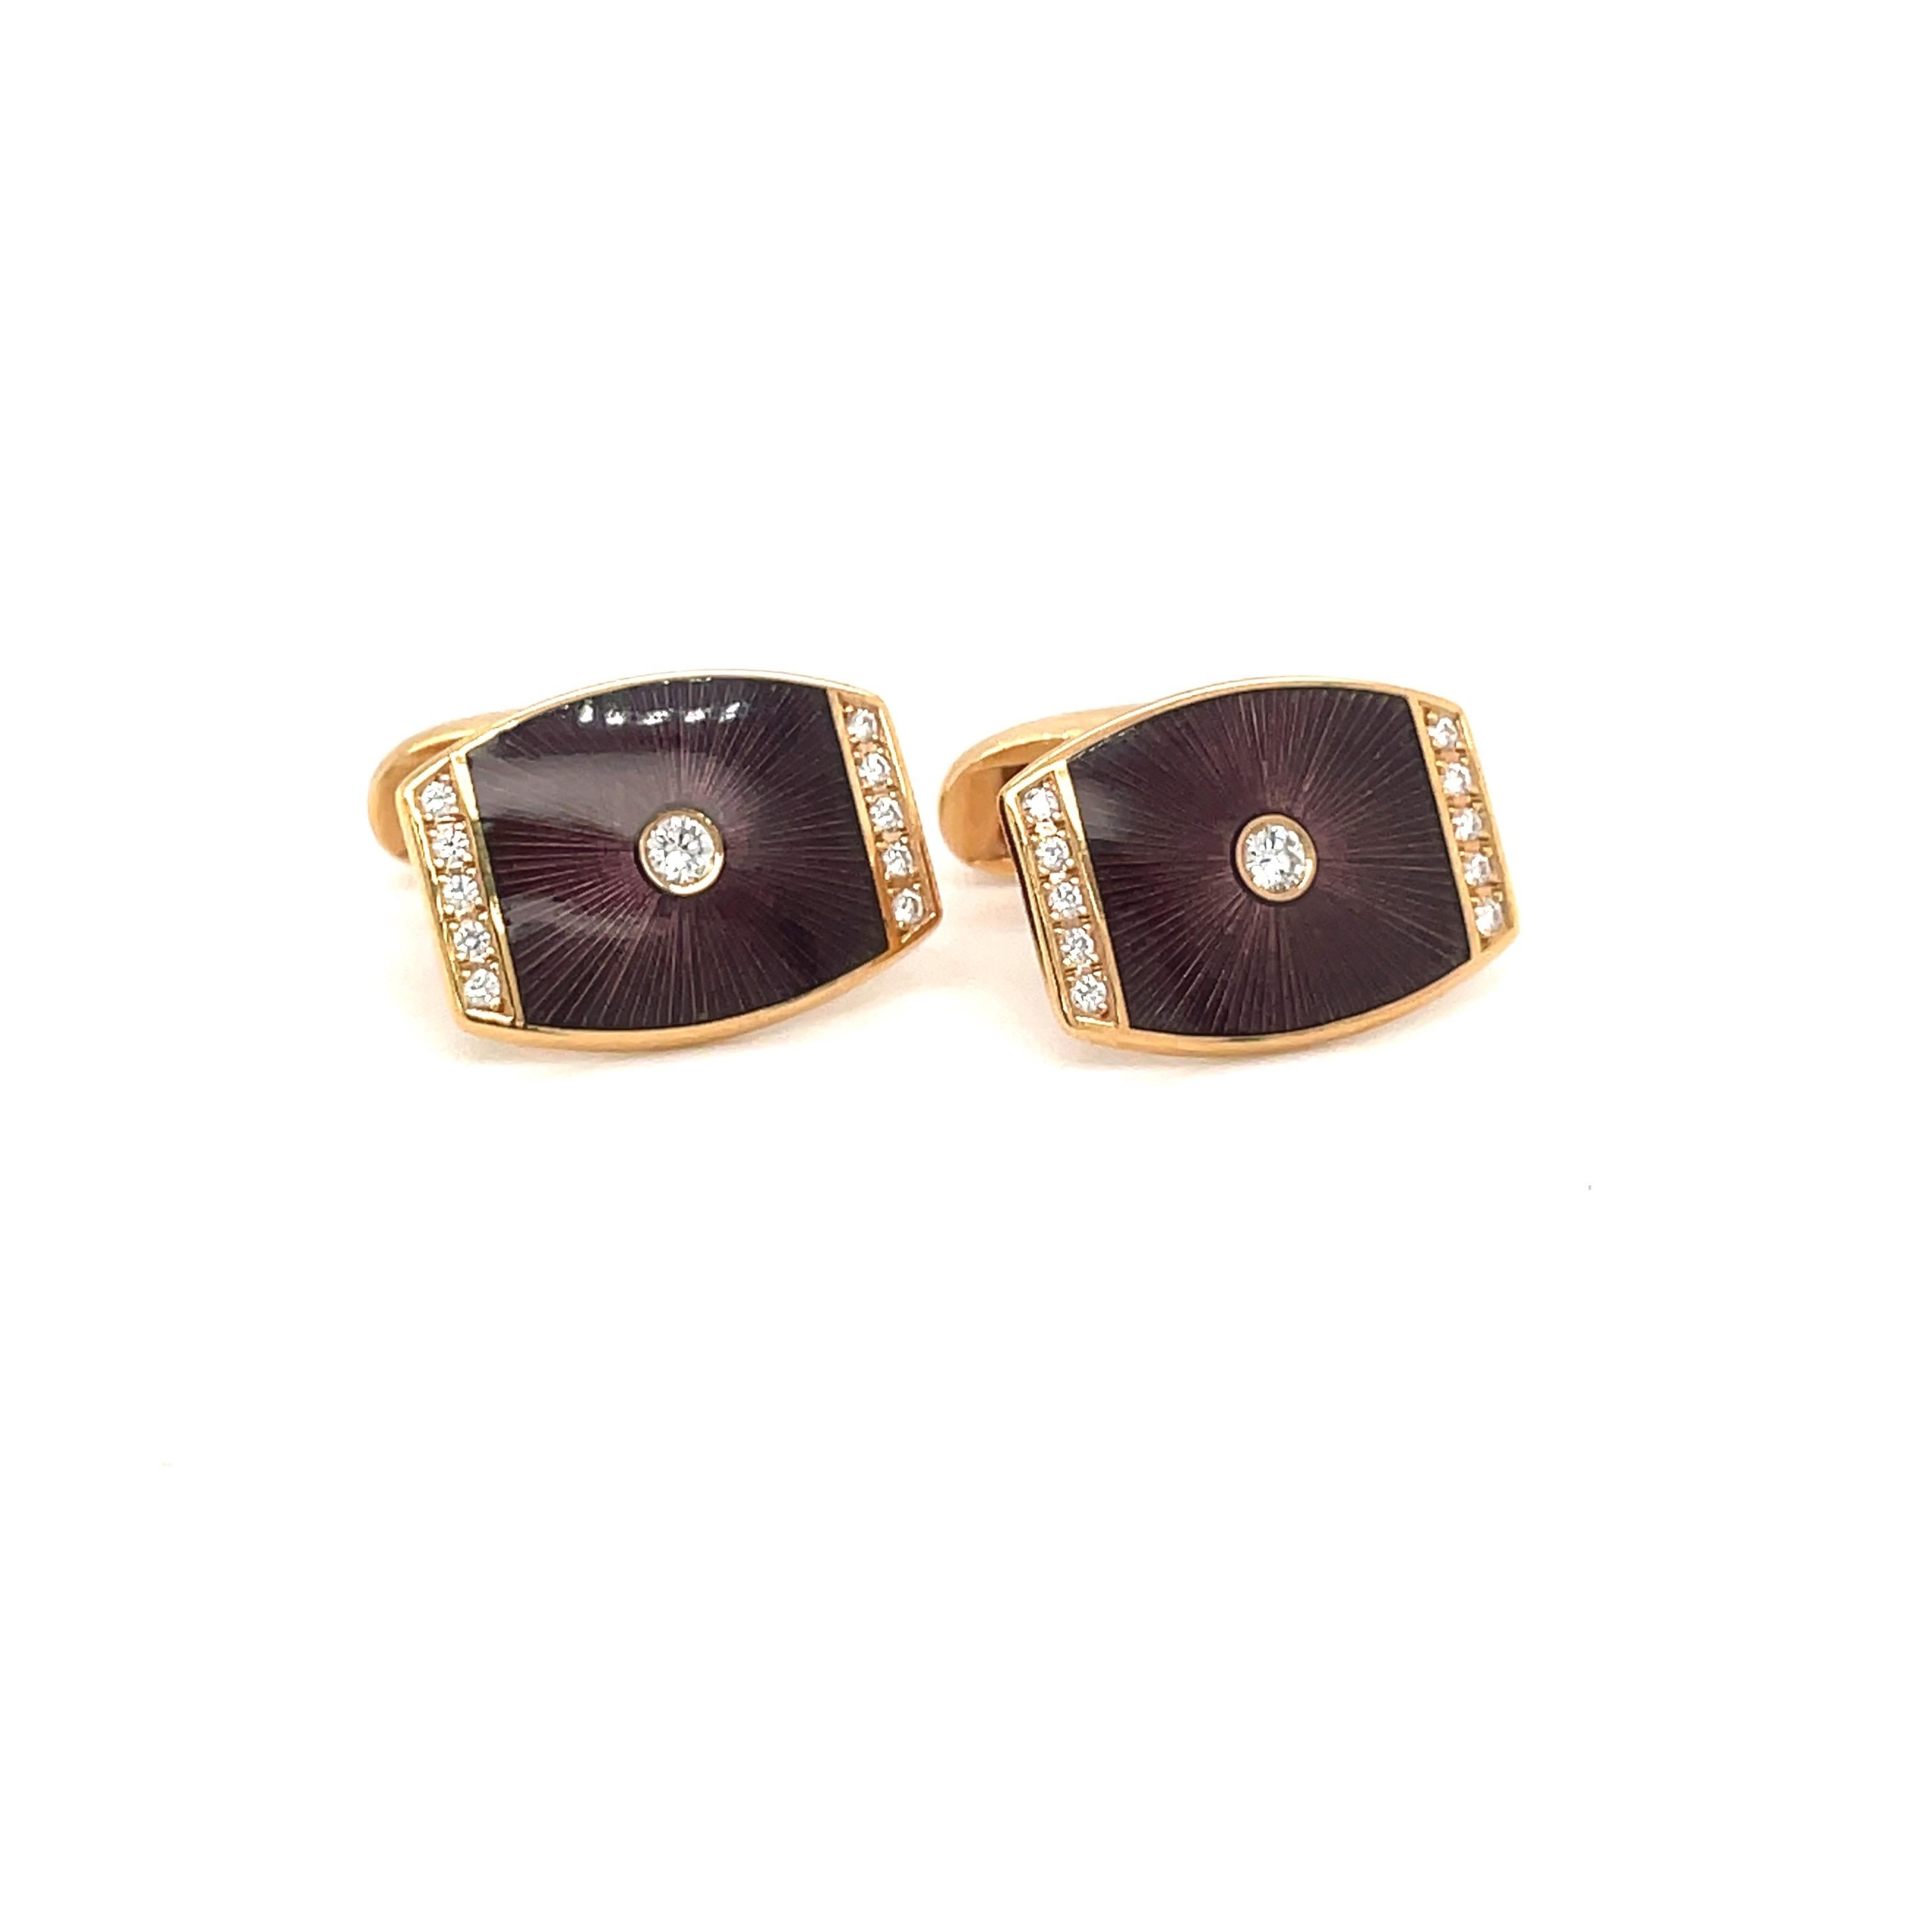 These modern Faberge 18 karat rose gold cuff links are crafted in an eggplant ( purplish brownish ) guilloche enamel with round brilliant diamonds.
The cuff links were created by Victor Mayor. Crafted in the tradition of the original Imperial eggs